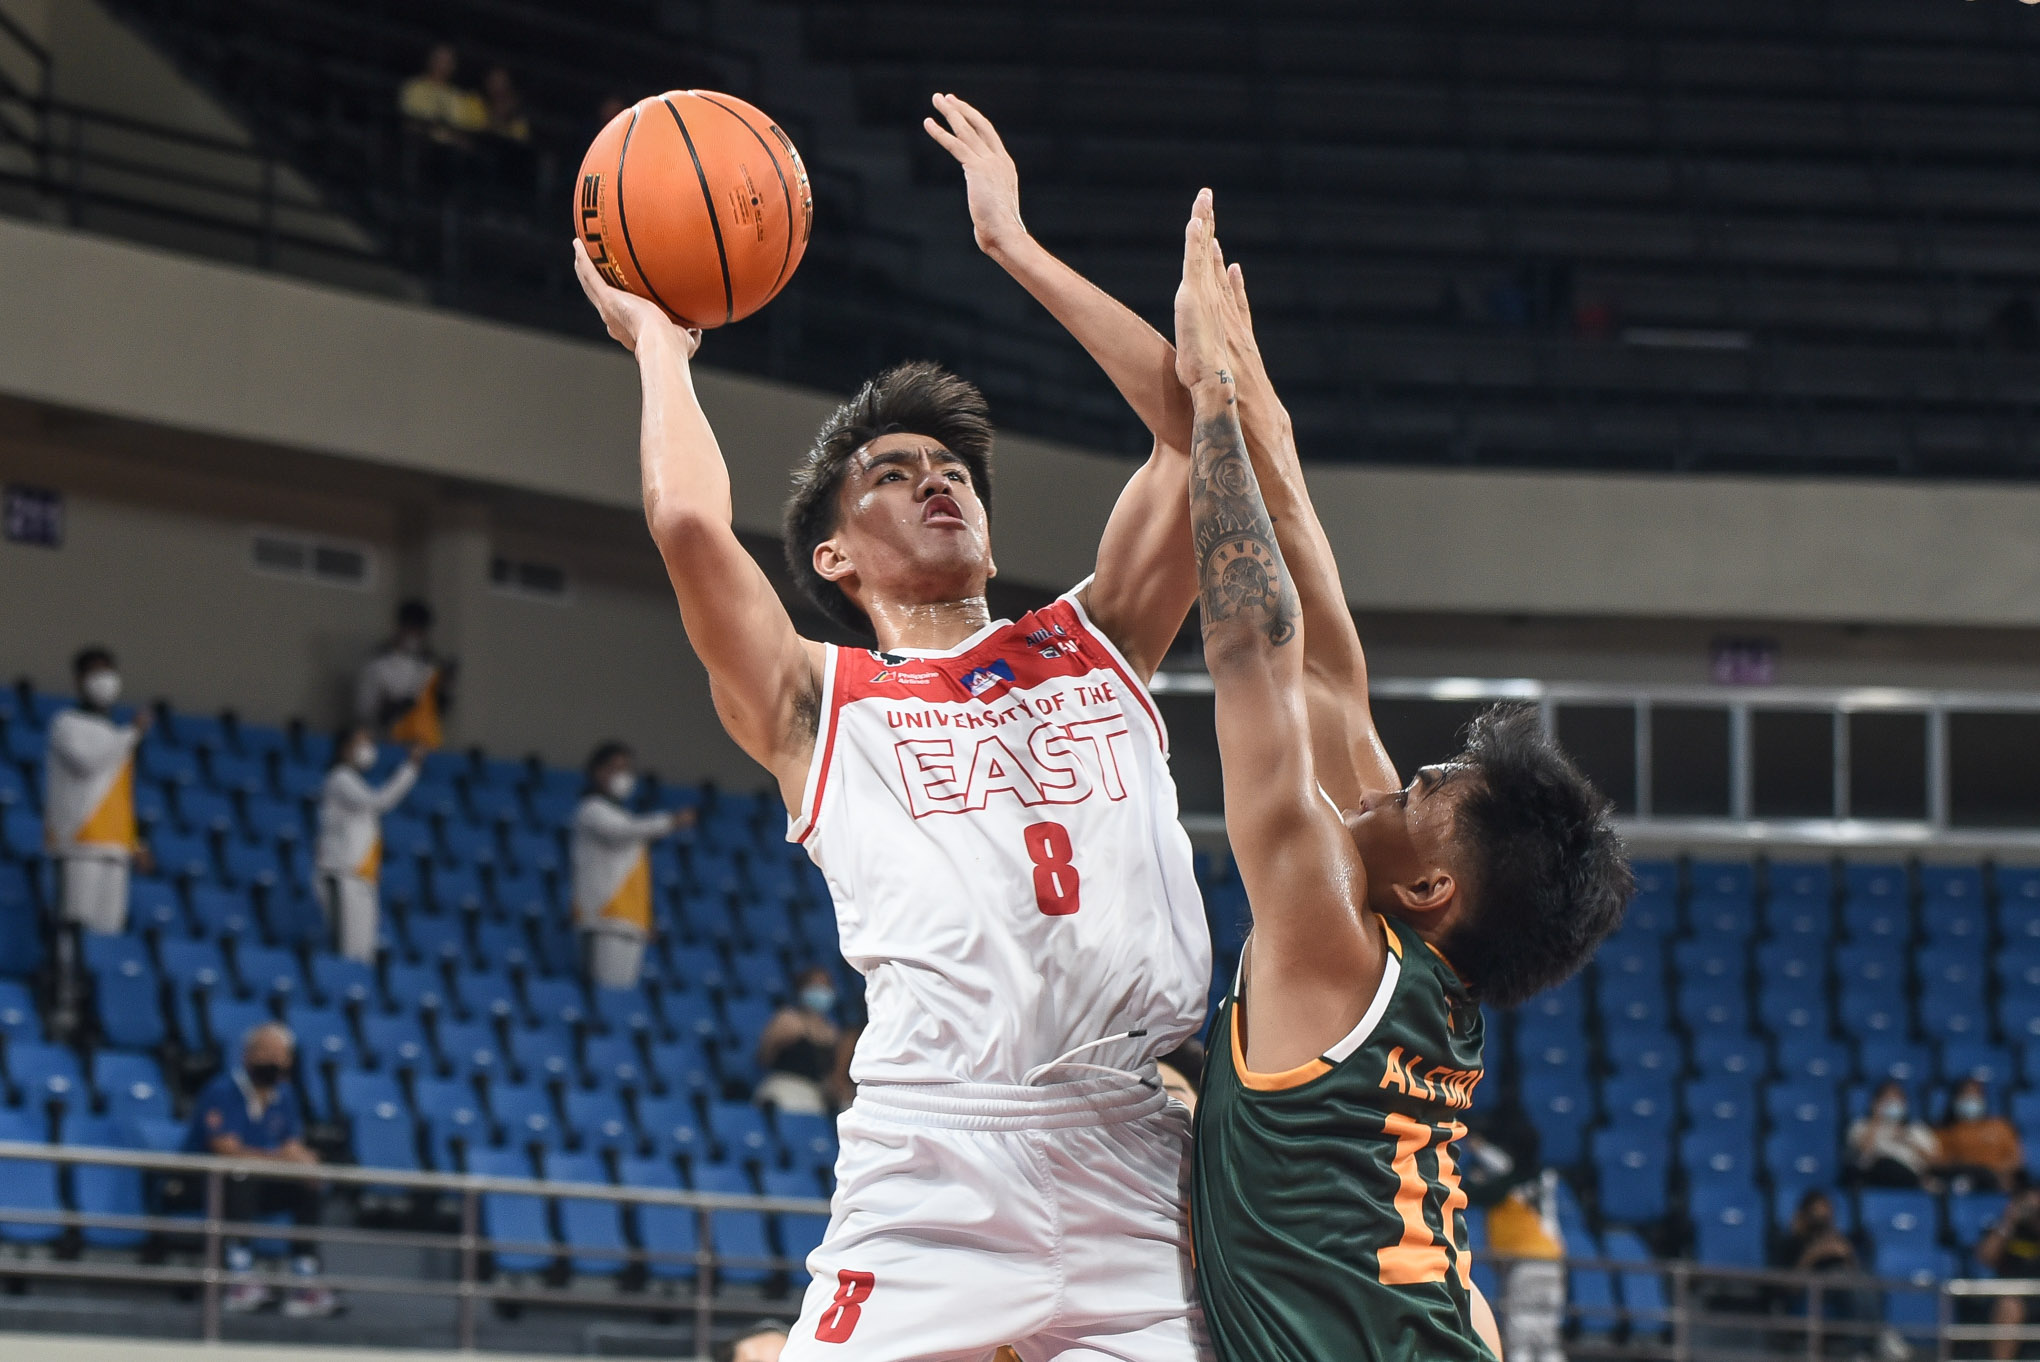 UE ends 3-year losing streak, UP continues to dominate